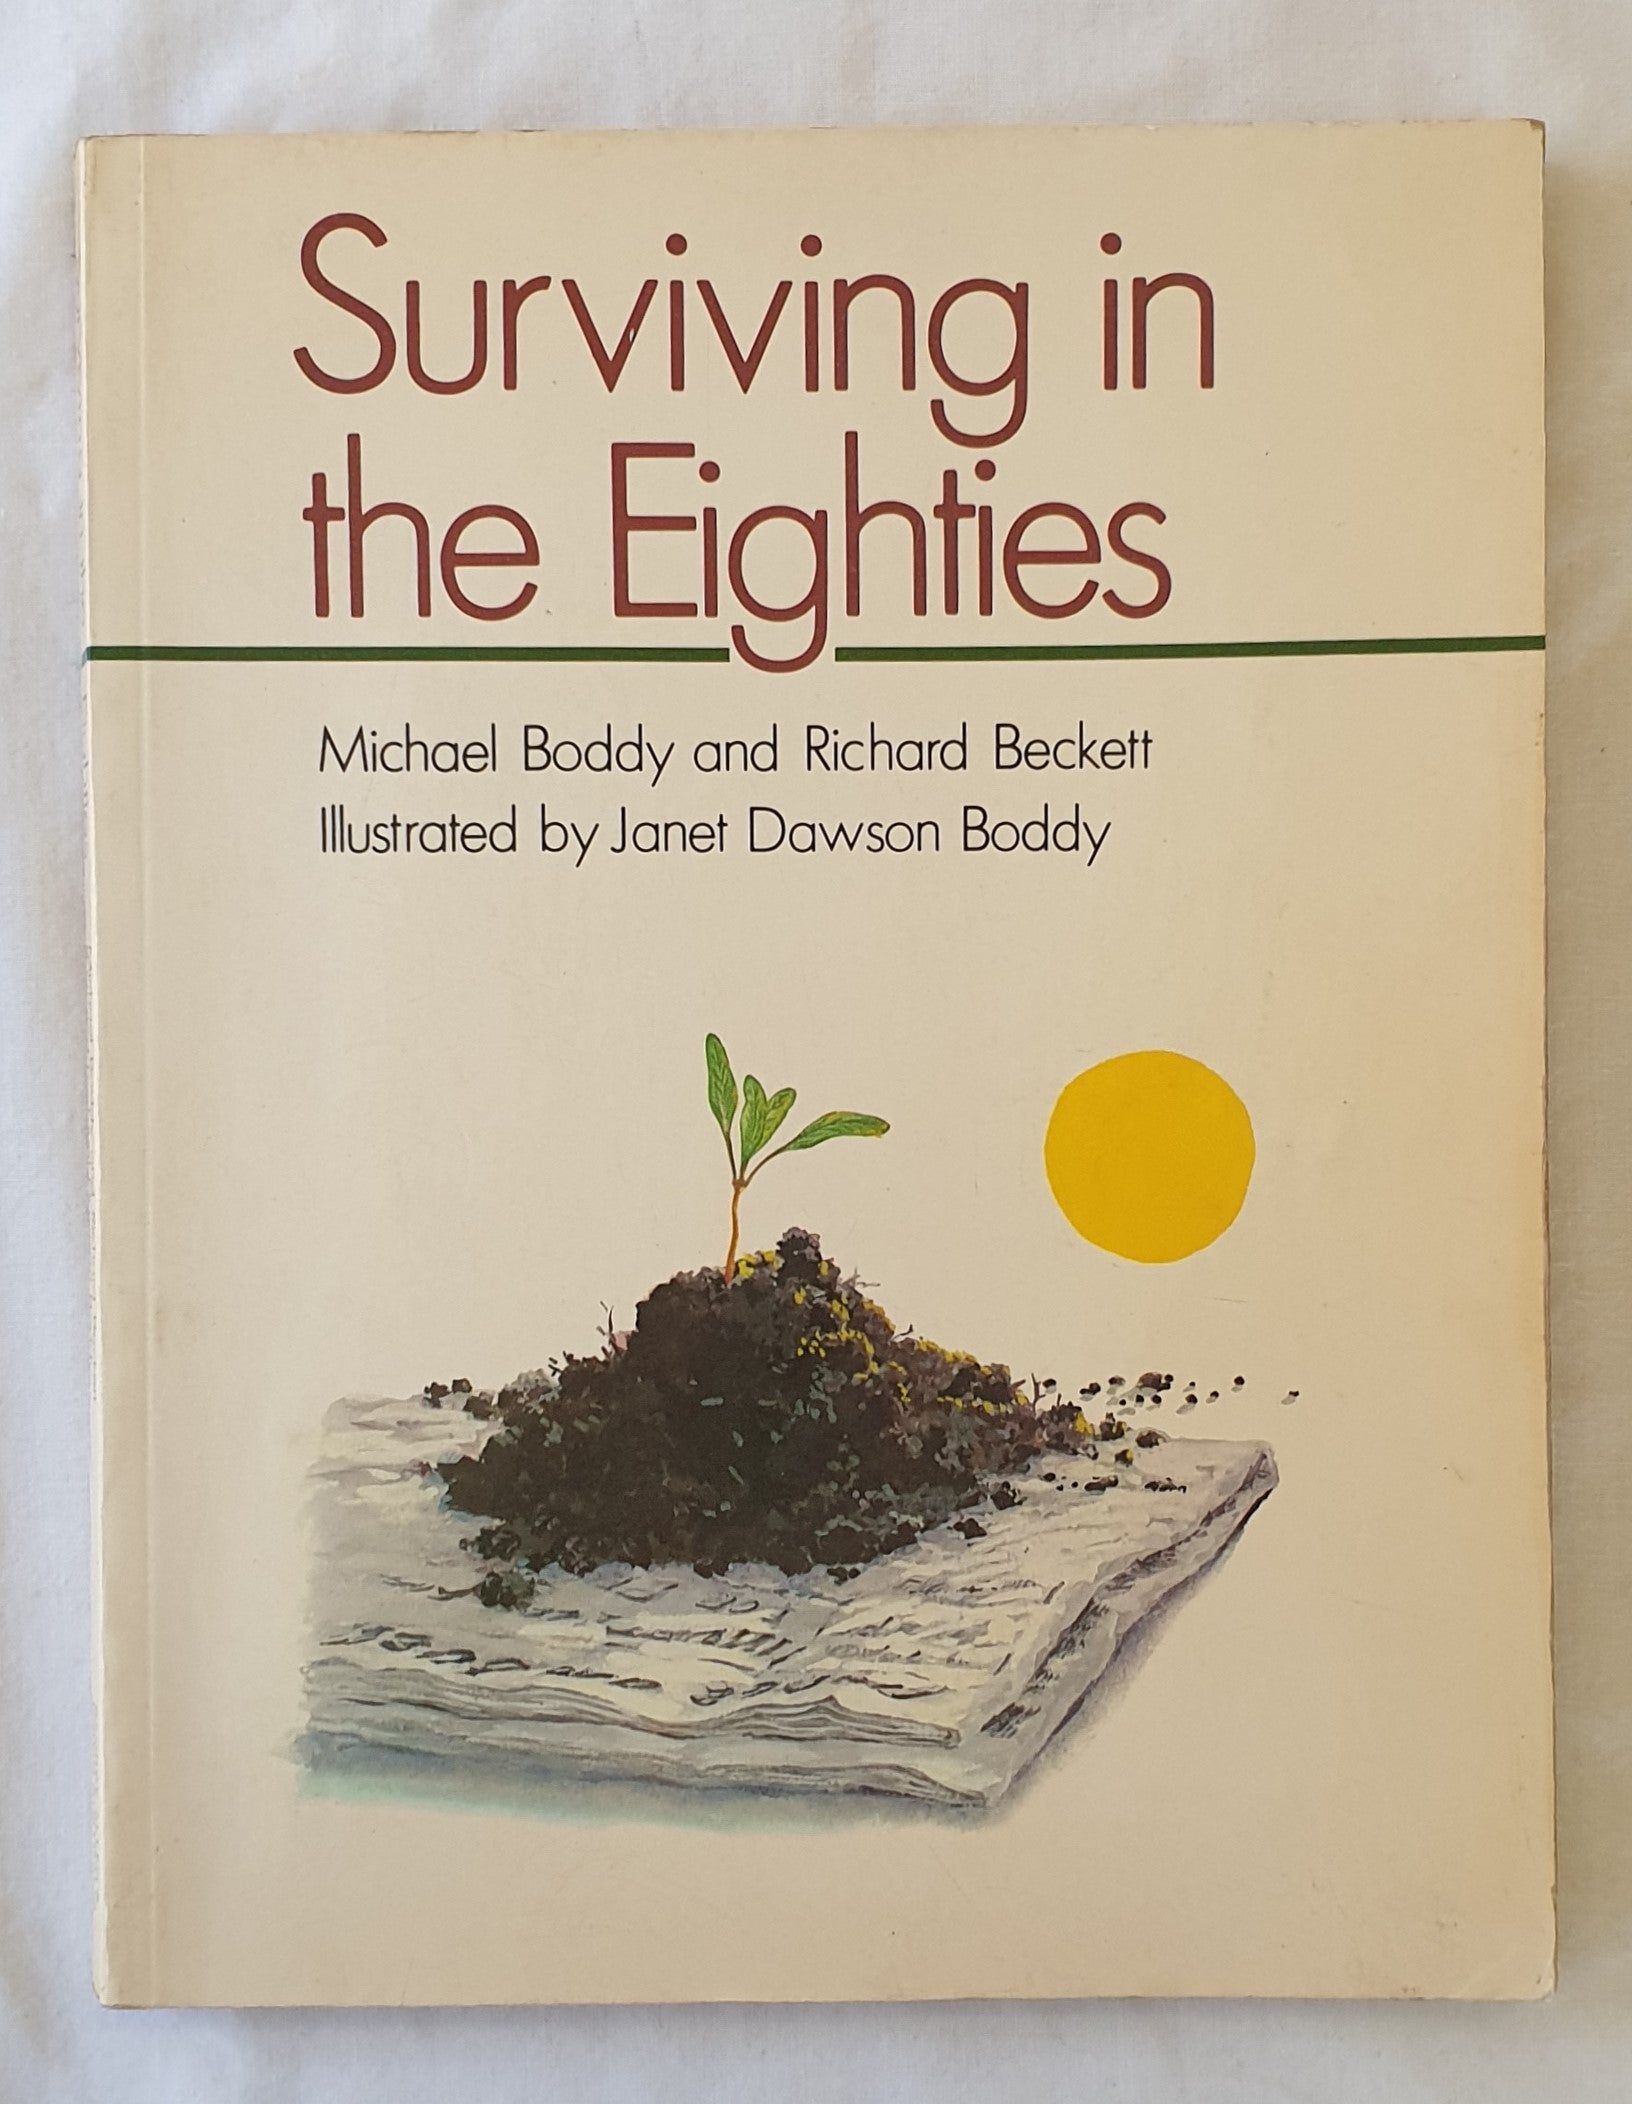 Surviving in the Eighties by Michael Boddy and Richard Beckett